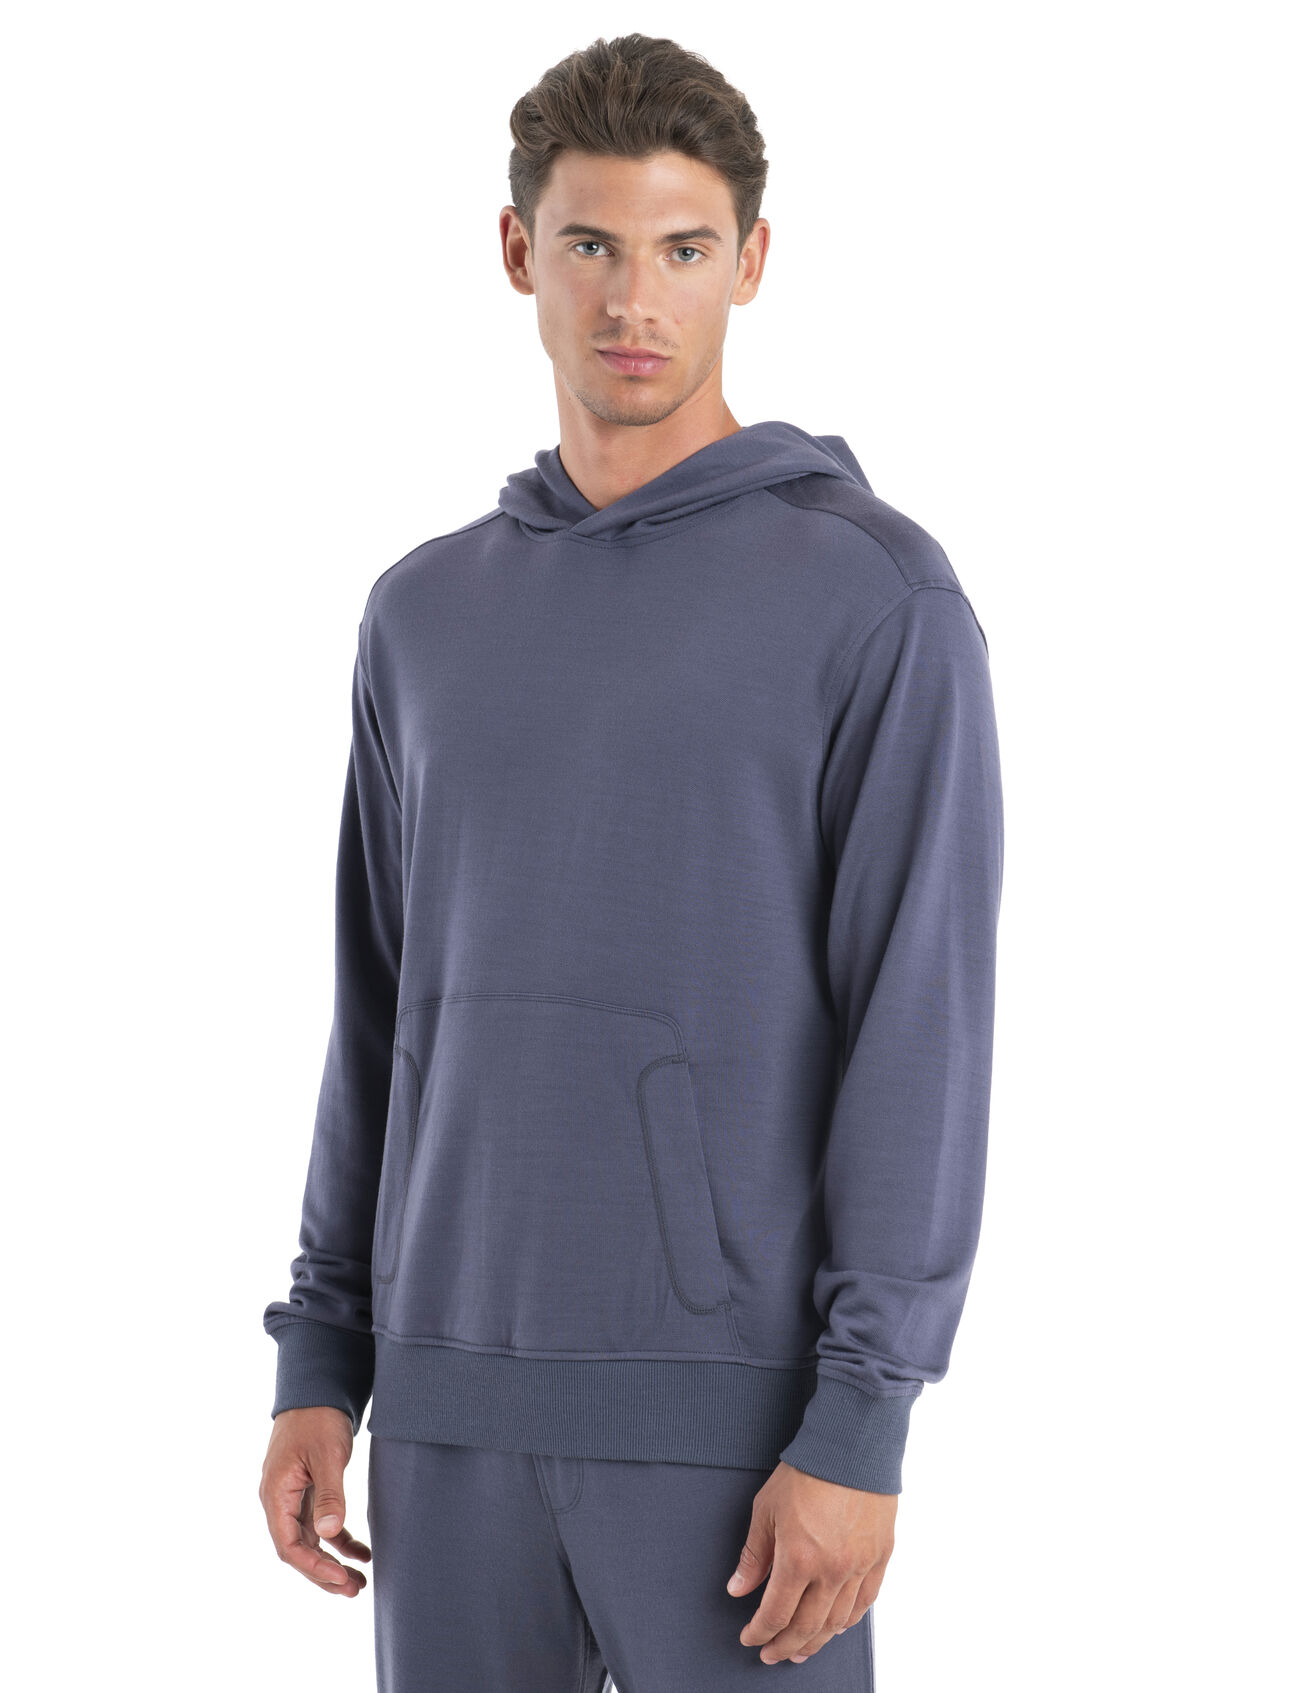 Mens Merino Blend Shifter II Long Sleeve Hoodie The ultimate before and after hoodie made with our Eucaform terry fabric that blends merino wool and TENCEL™ Lyocell, the Shifter II Long Sleeve Hoodie has down time covered.